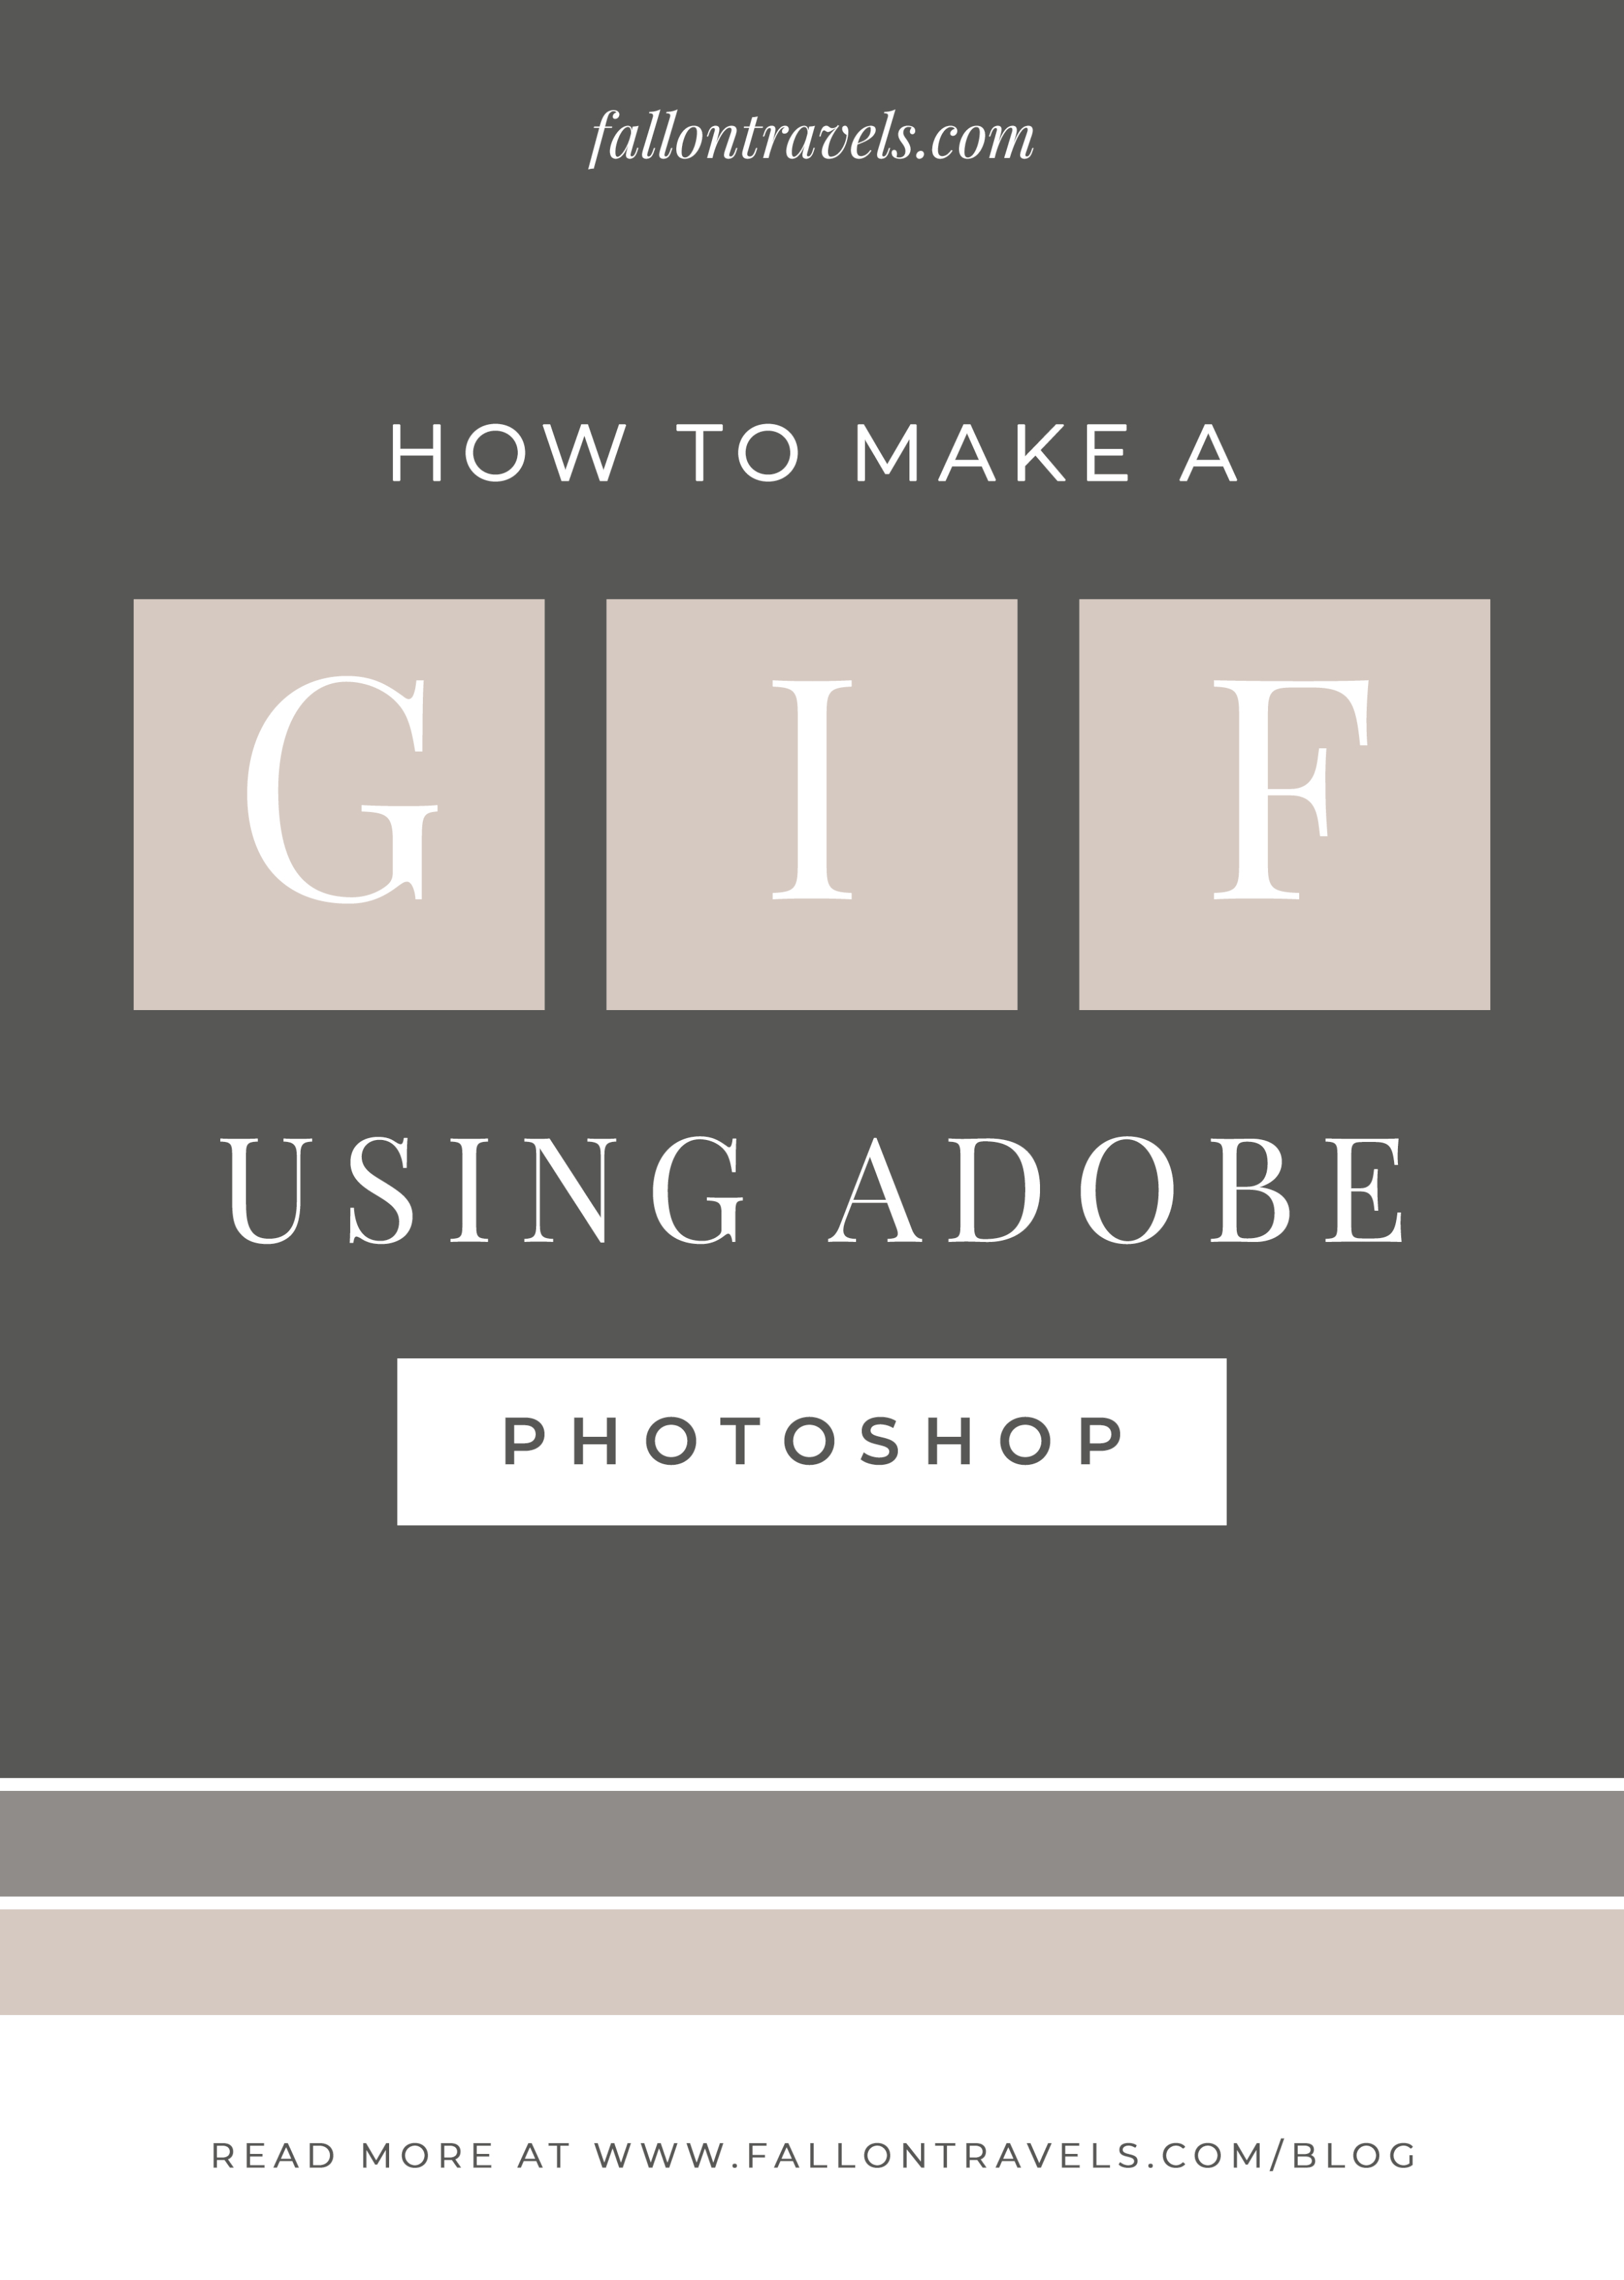 How to Create an Animated GIF in Photoshop CC – Photoshop and